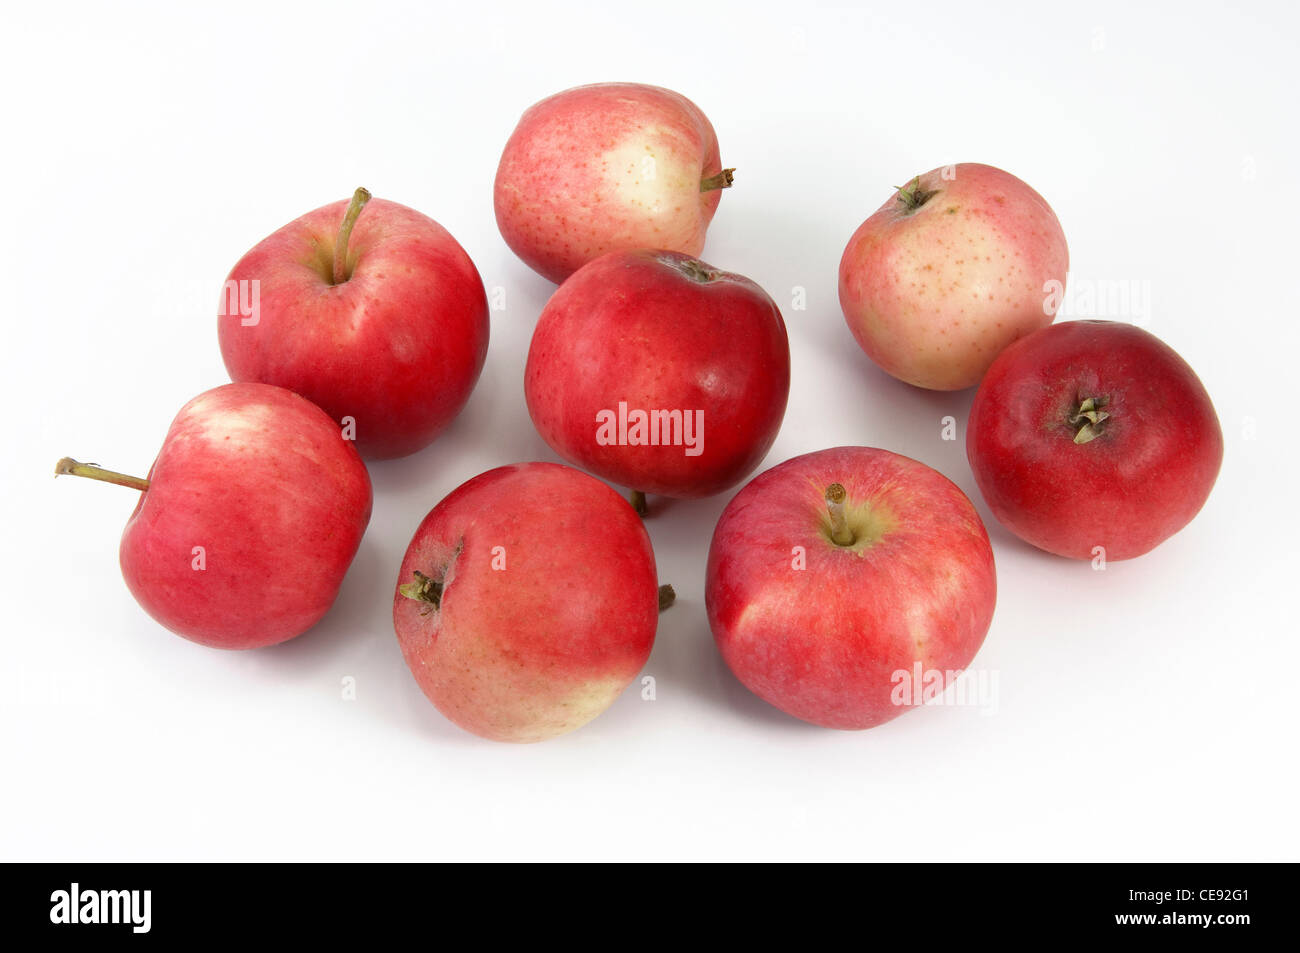 Domestic Apple (Malus domestica), variety: Peach Red Summer Apple. Several apples, studio picture against a white background. Stock Photo